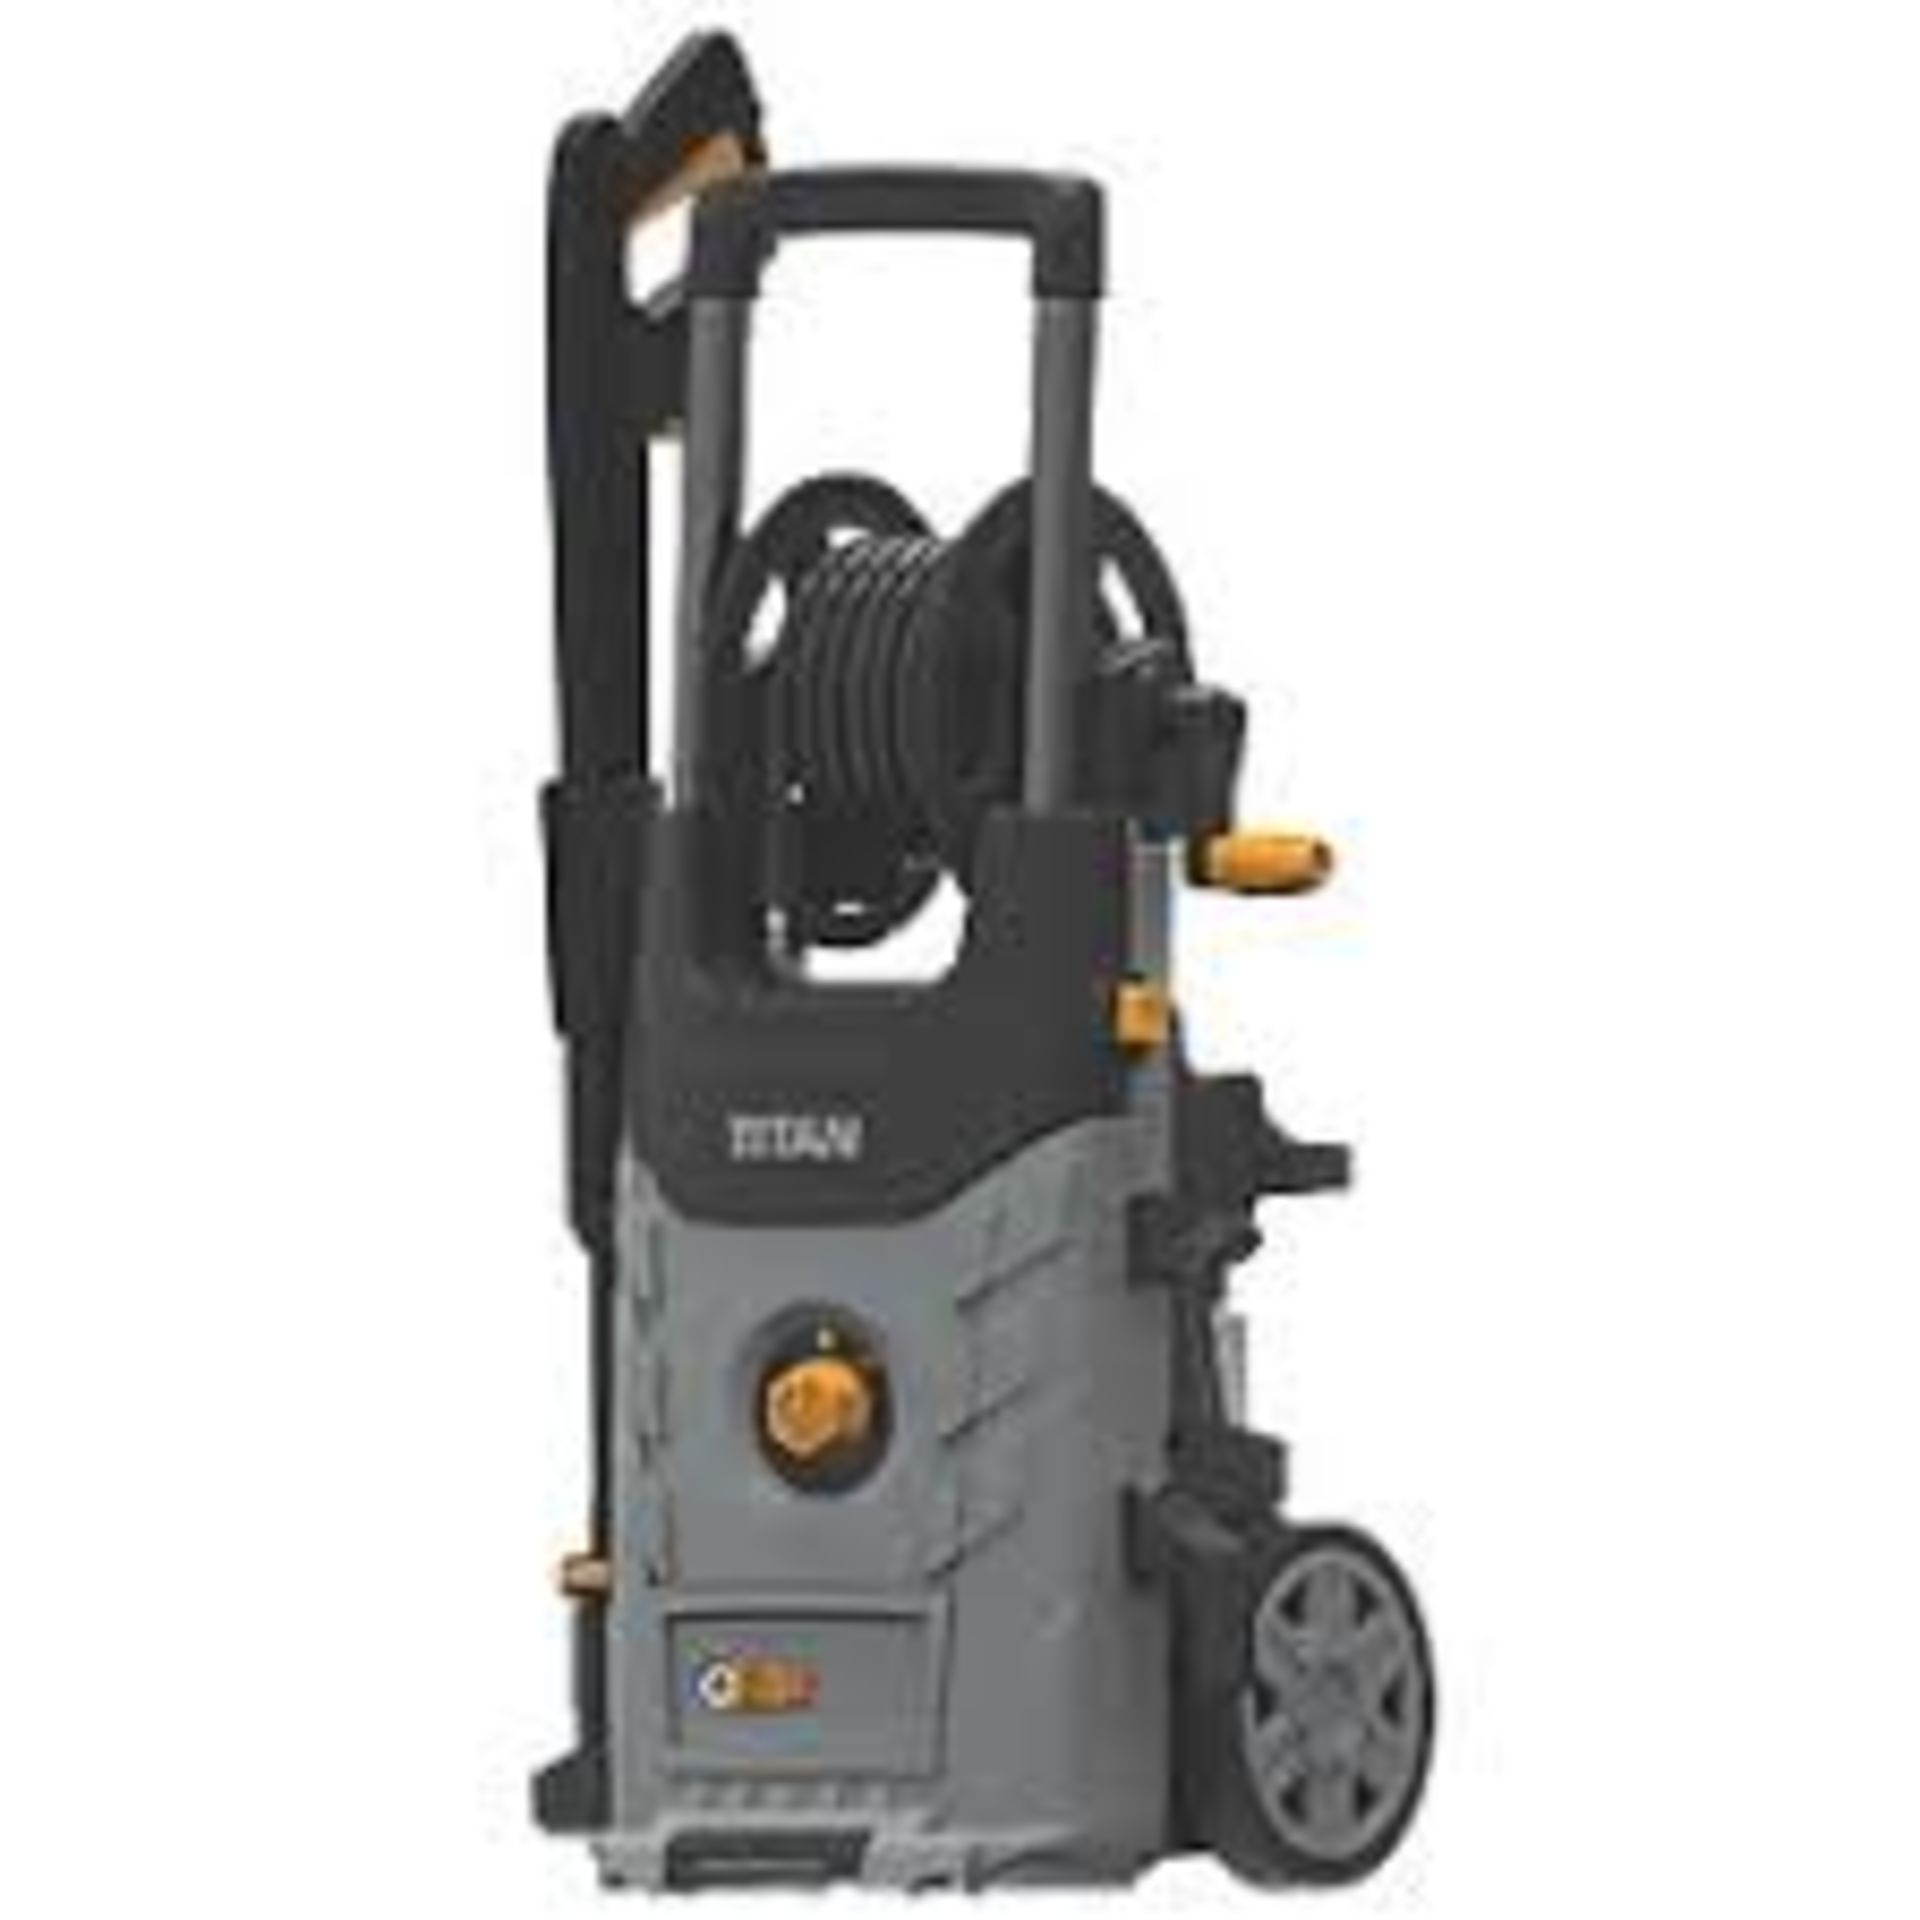 Titan TTB2200PRW 150bar Electric High Pressure Washer 2.2kW 230V. - P3. Compact design with space-